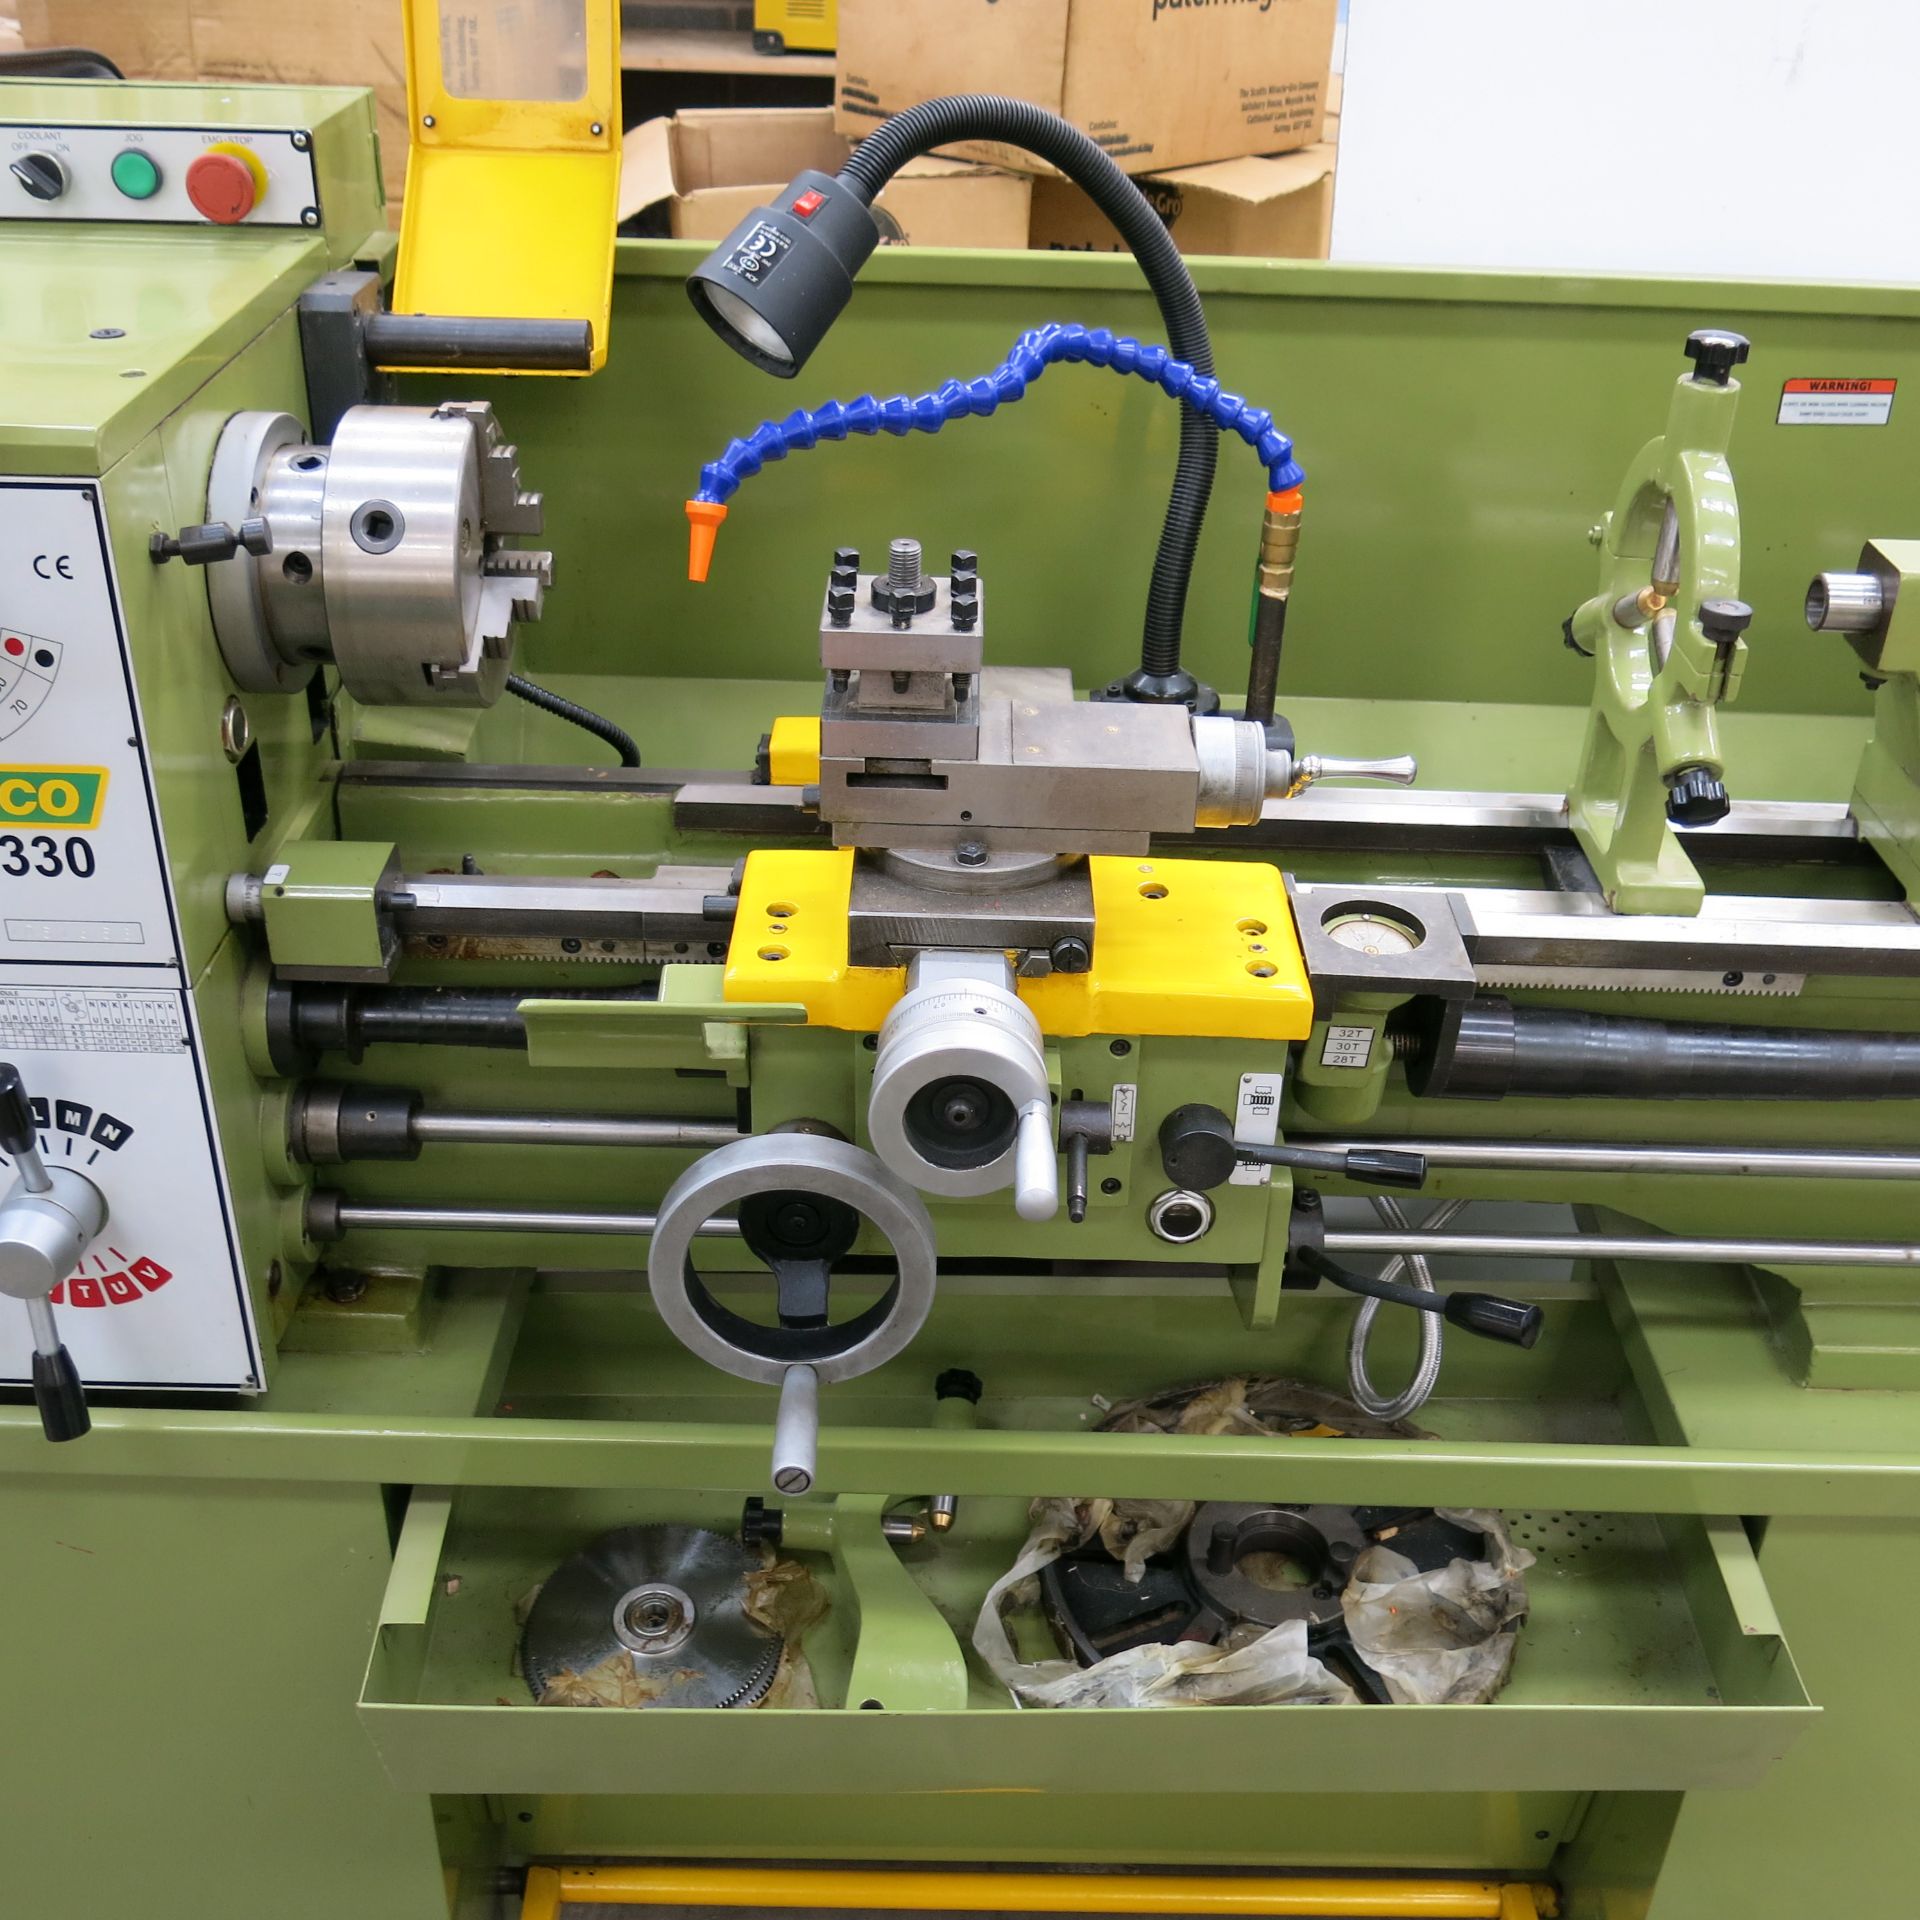 * A Warco GH1330 440V 3 Phase Lathe, (Current Model) SN 1051353 c/w extra gears. Please note, - Image 2 of 6